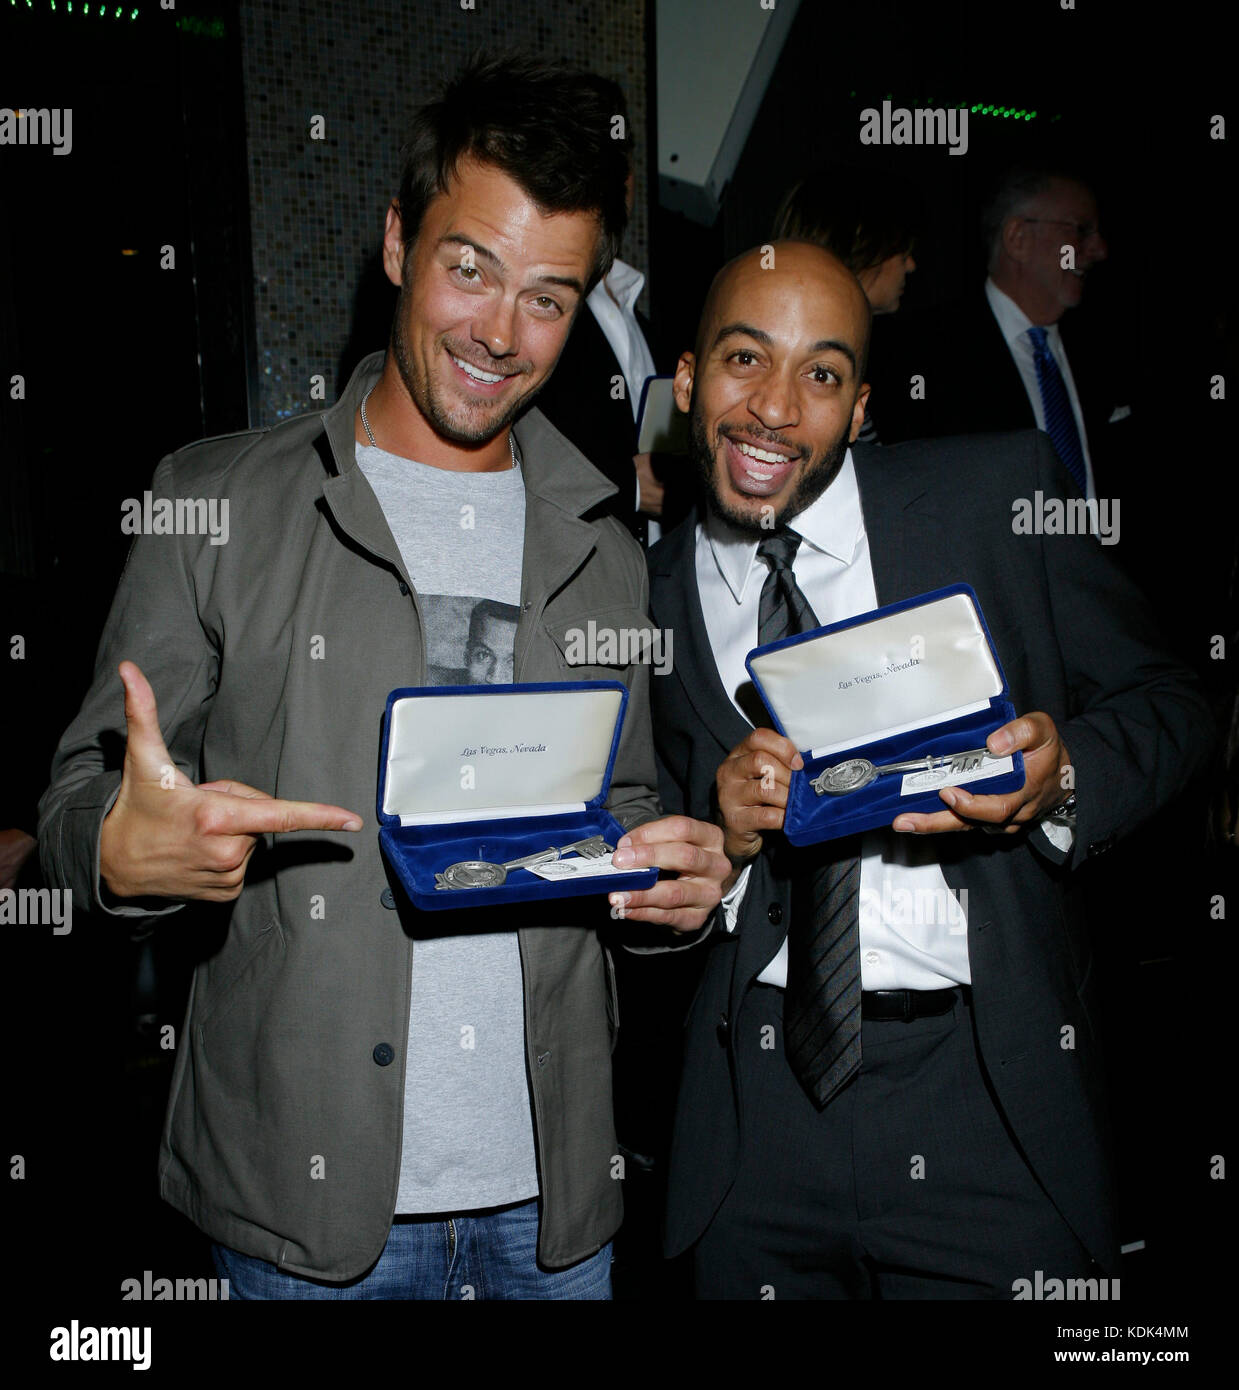 Josh Duhamel and James Lesure pictured at the 'Keys to the City' ceremony as the show 'Las Vegas' celebrates its 100th episode at Ghostbar at The Palms Casino Resort on January 10, 2008 in Las Vegas, Nevada. © Kabik / MediaPunch Stock Photo